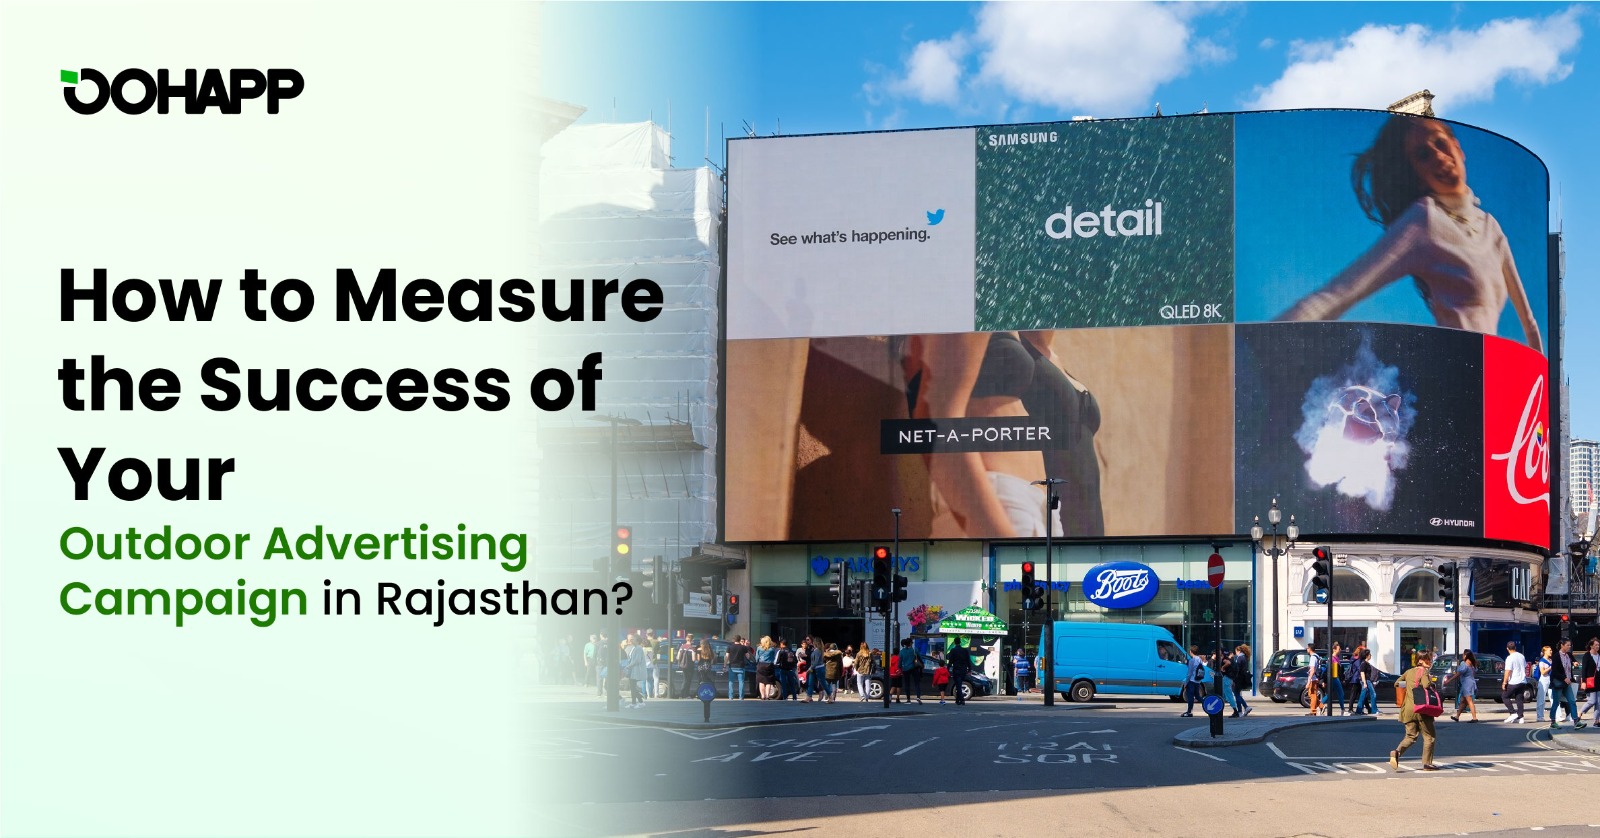 How to Measure the Success of Your Outdoor Advertising Campaign in Rajasthan?